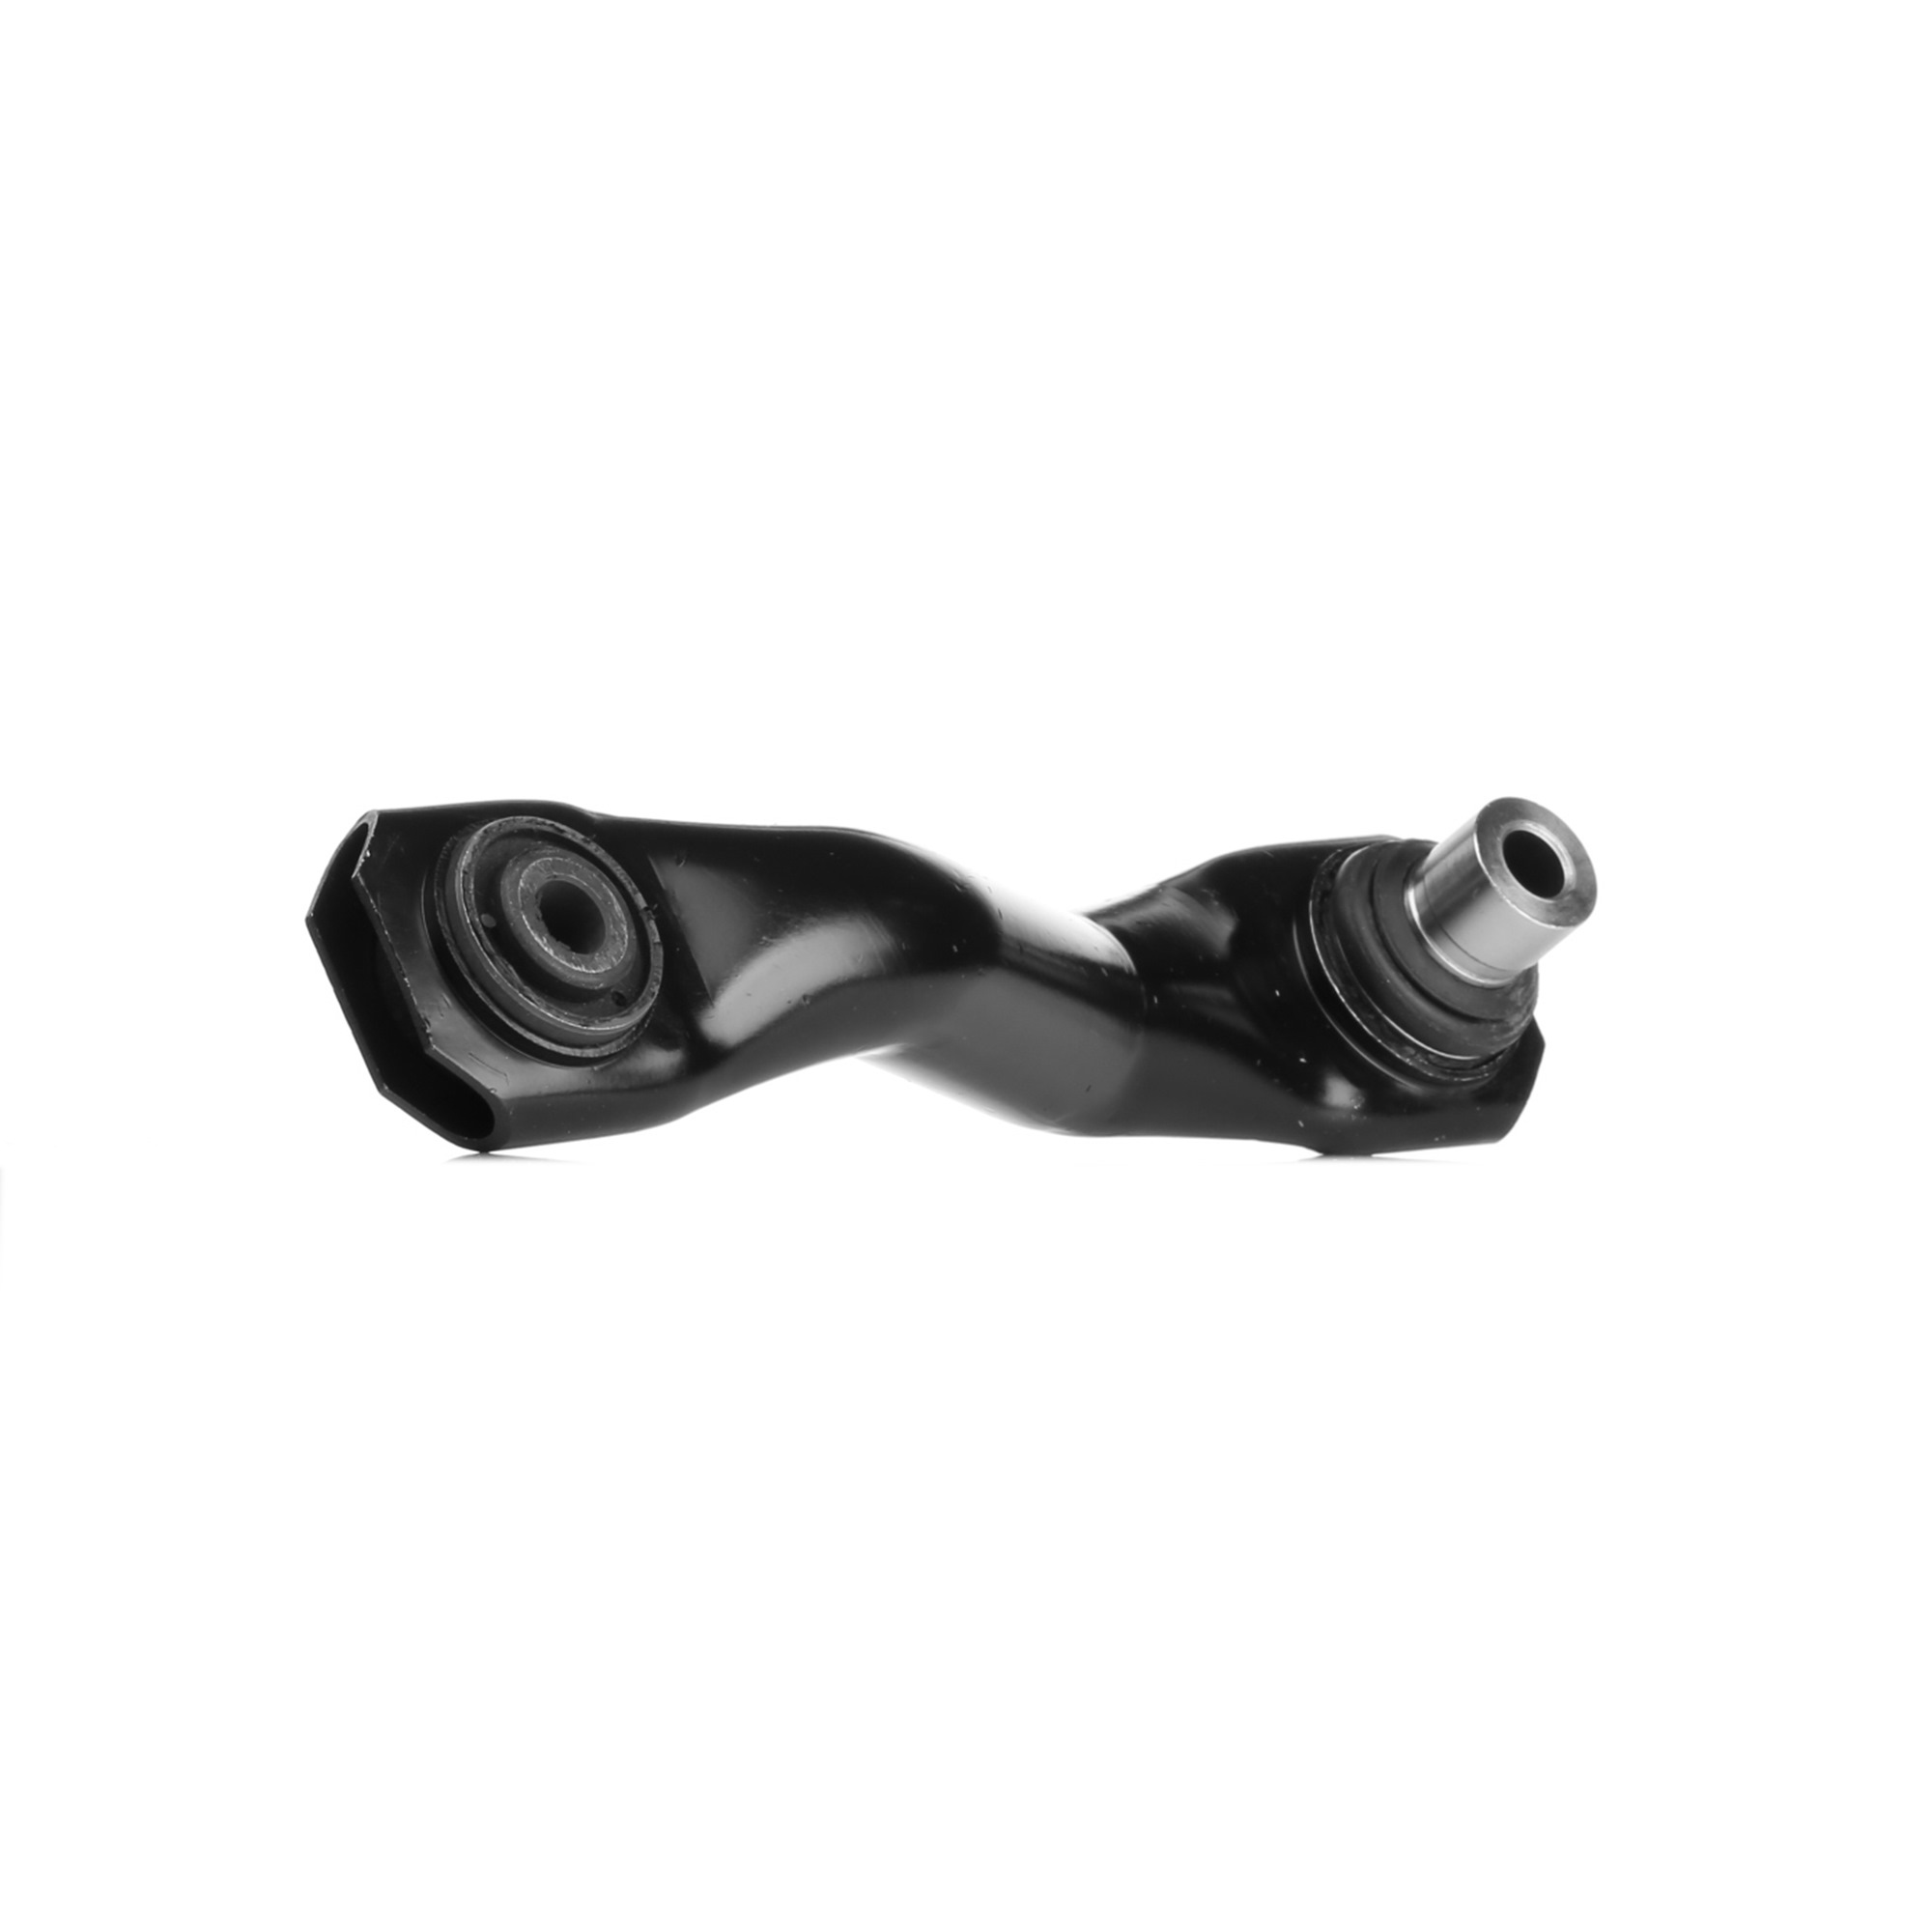 RIDEX 273C0575 Suspension arm Rear Axle both sides, Front, Lower, Control Arm, Steel